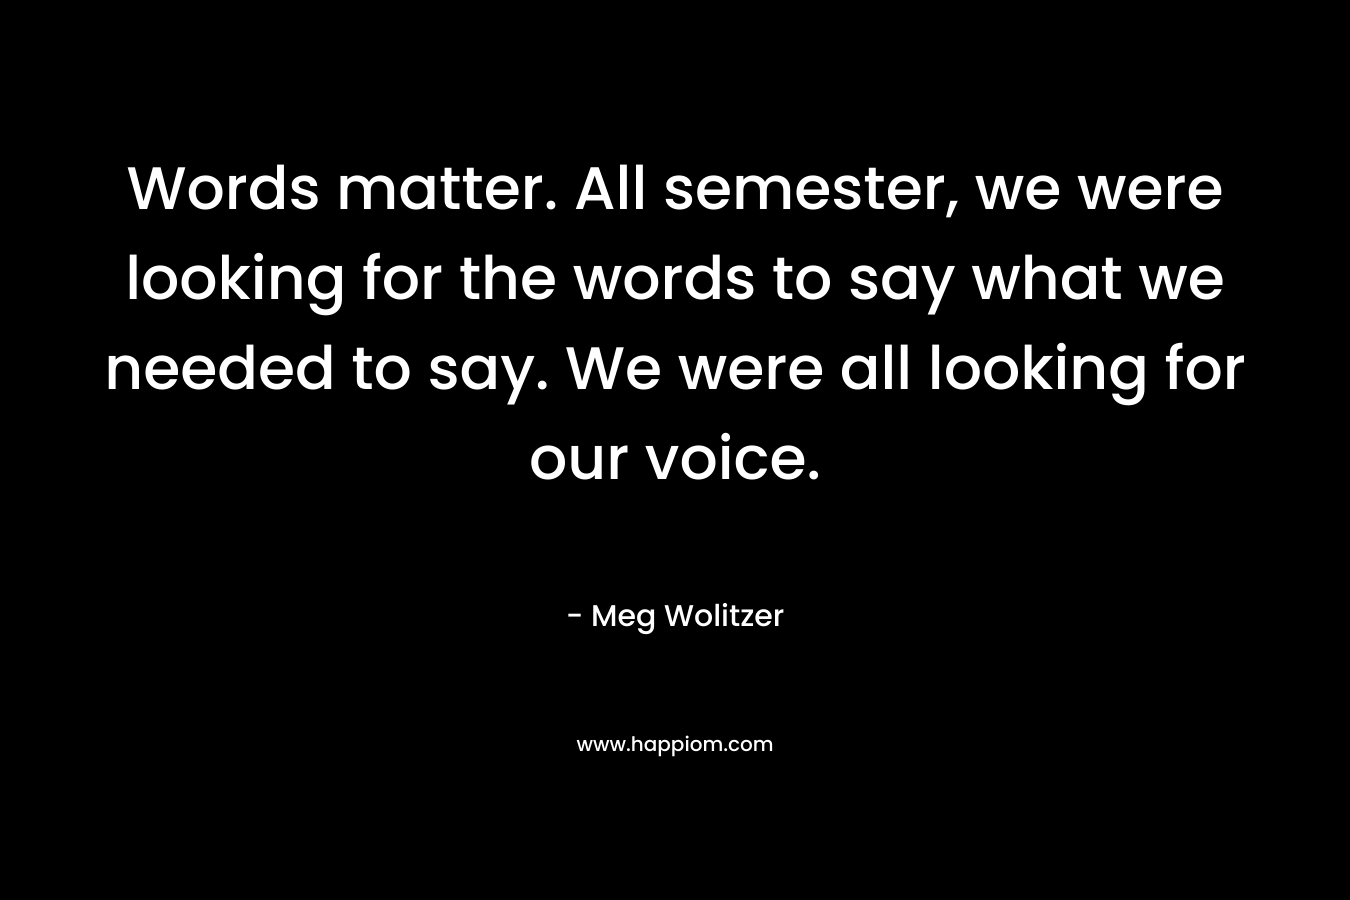 Words matter. All semester, we were looking for the words to say what we needed to say. We were all looking for our voice.